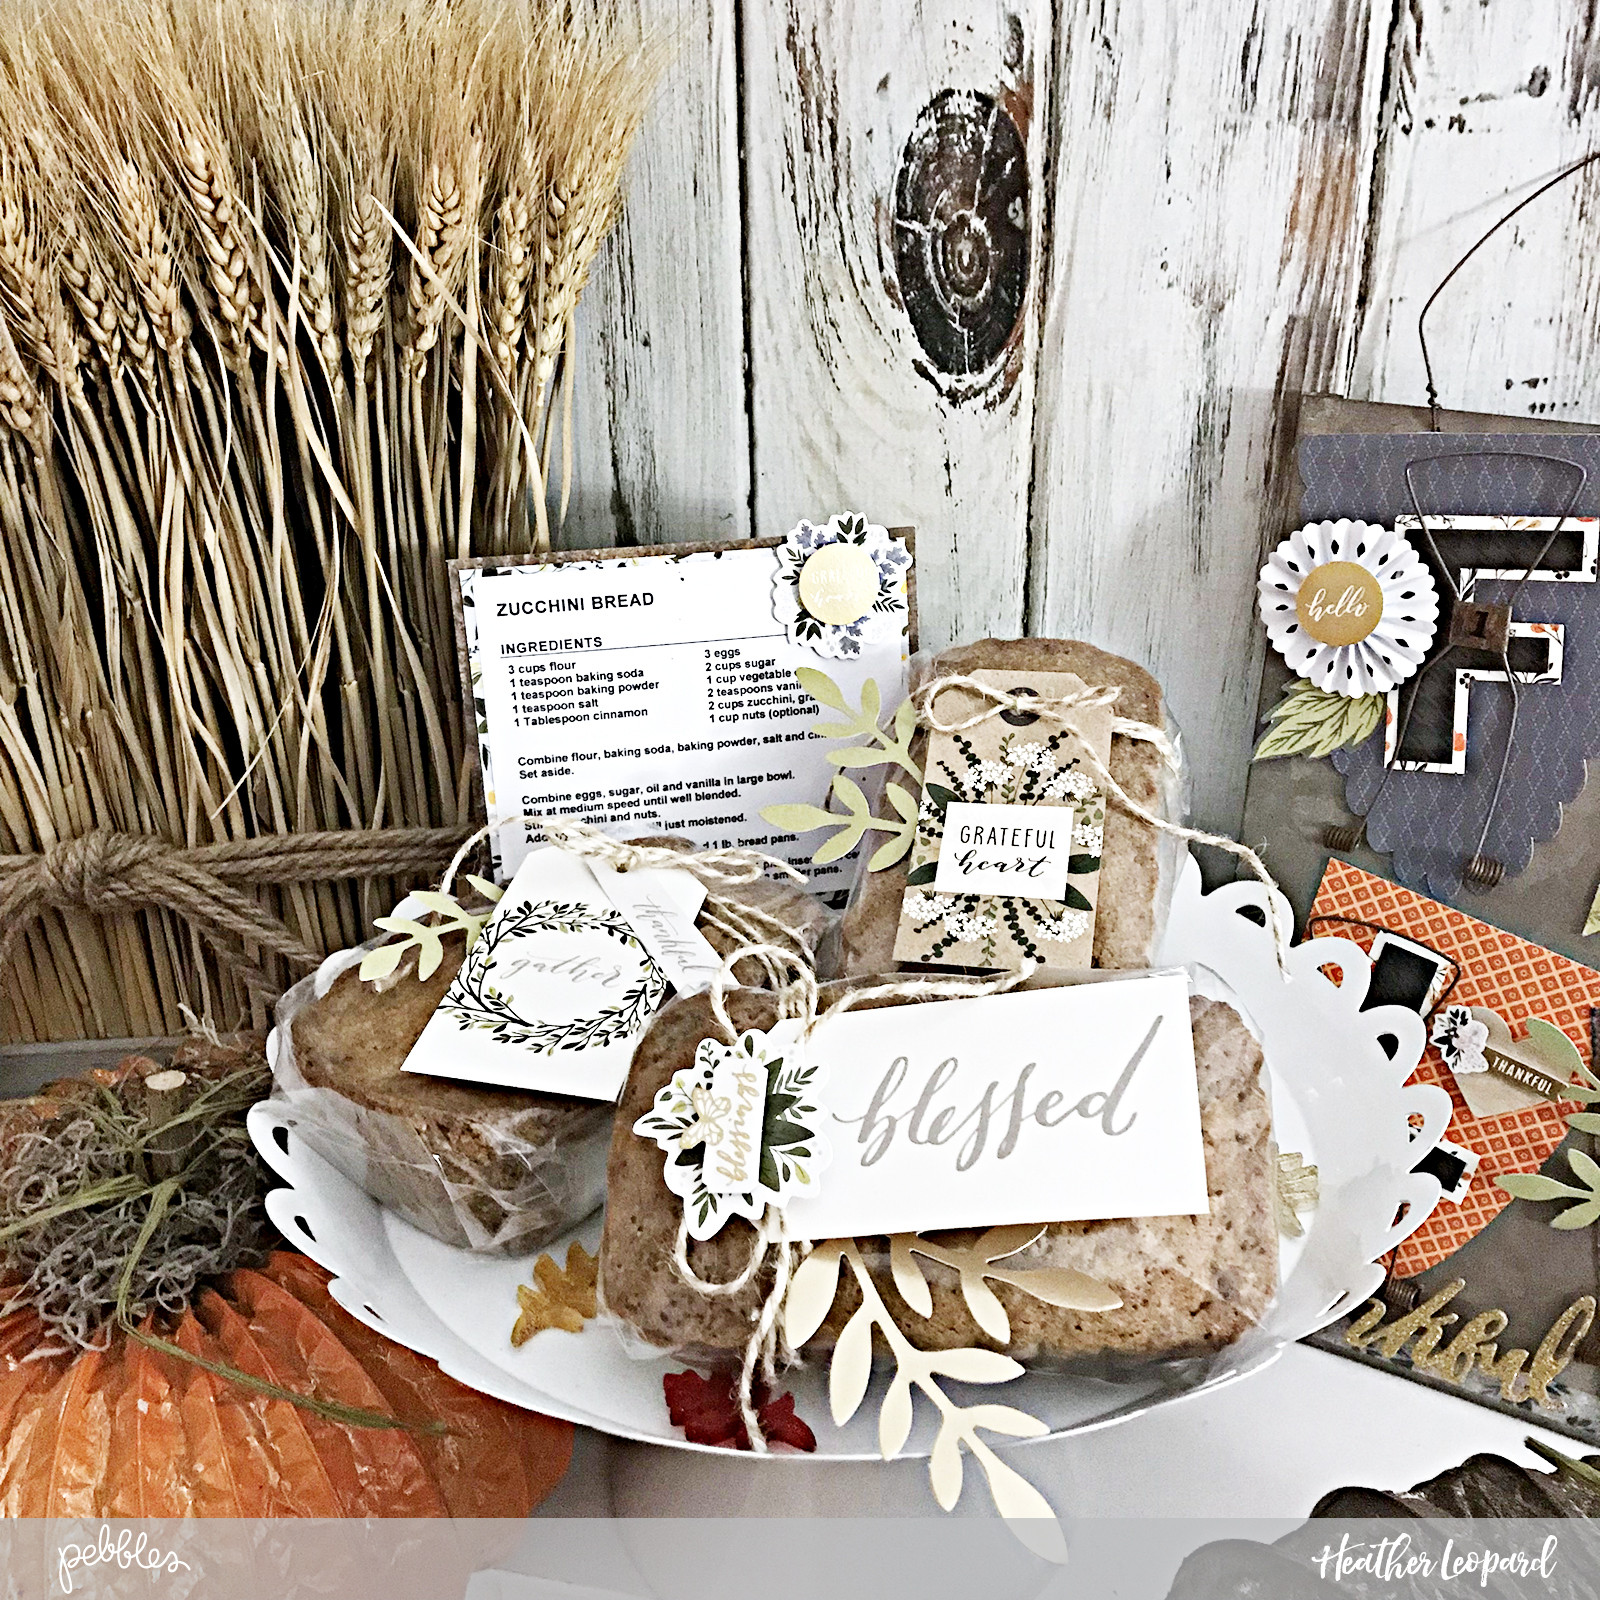 Gift Ideas For Thanksgiving Guests
 Treat your guests with a homemade Thanksgiving t